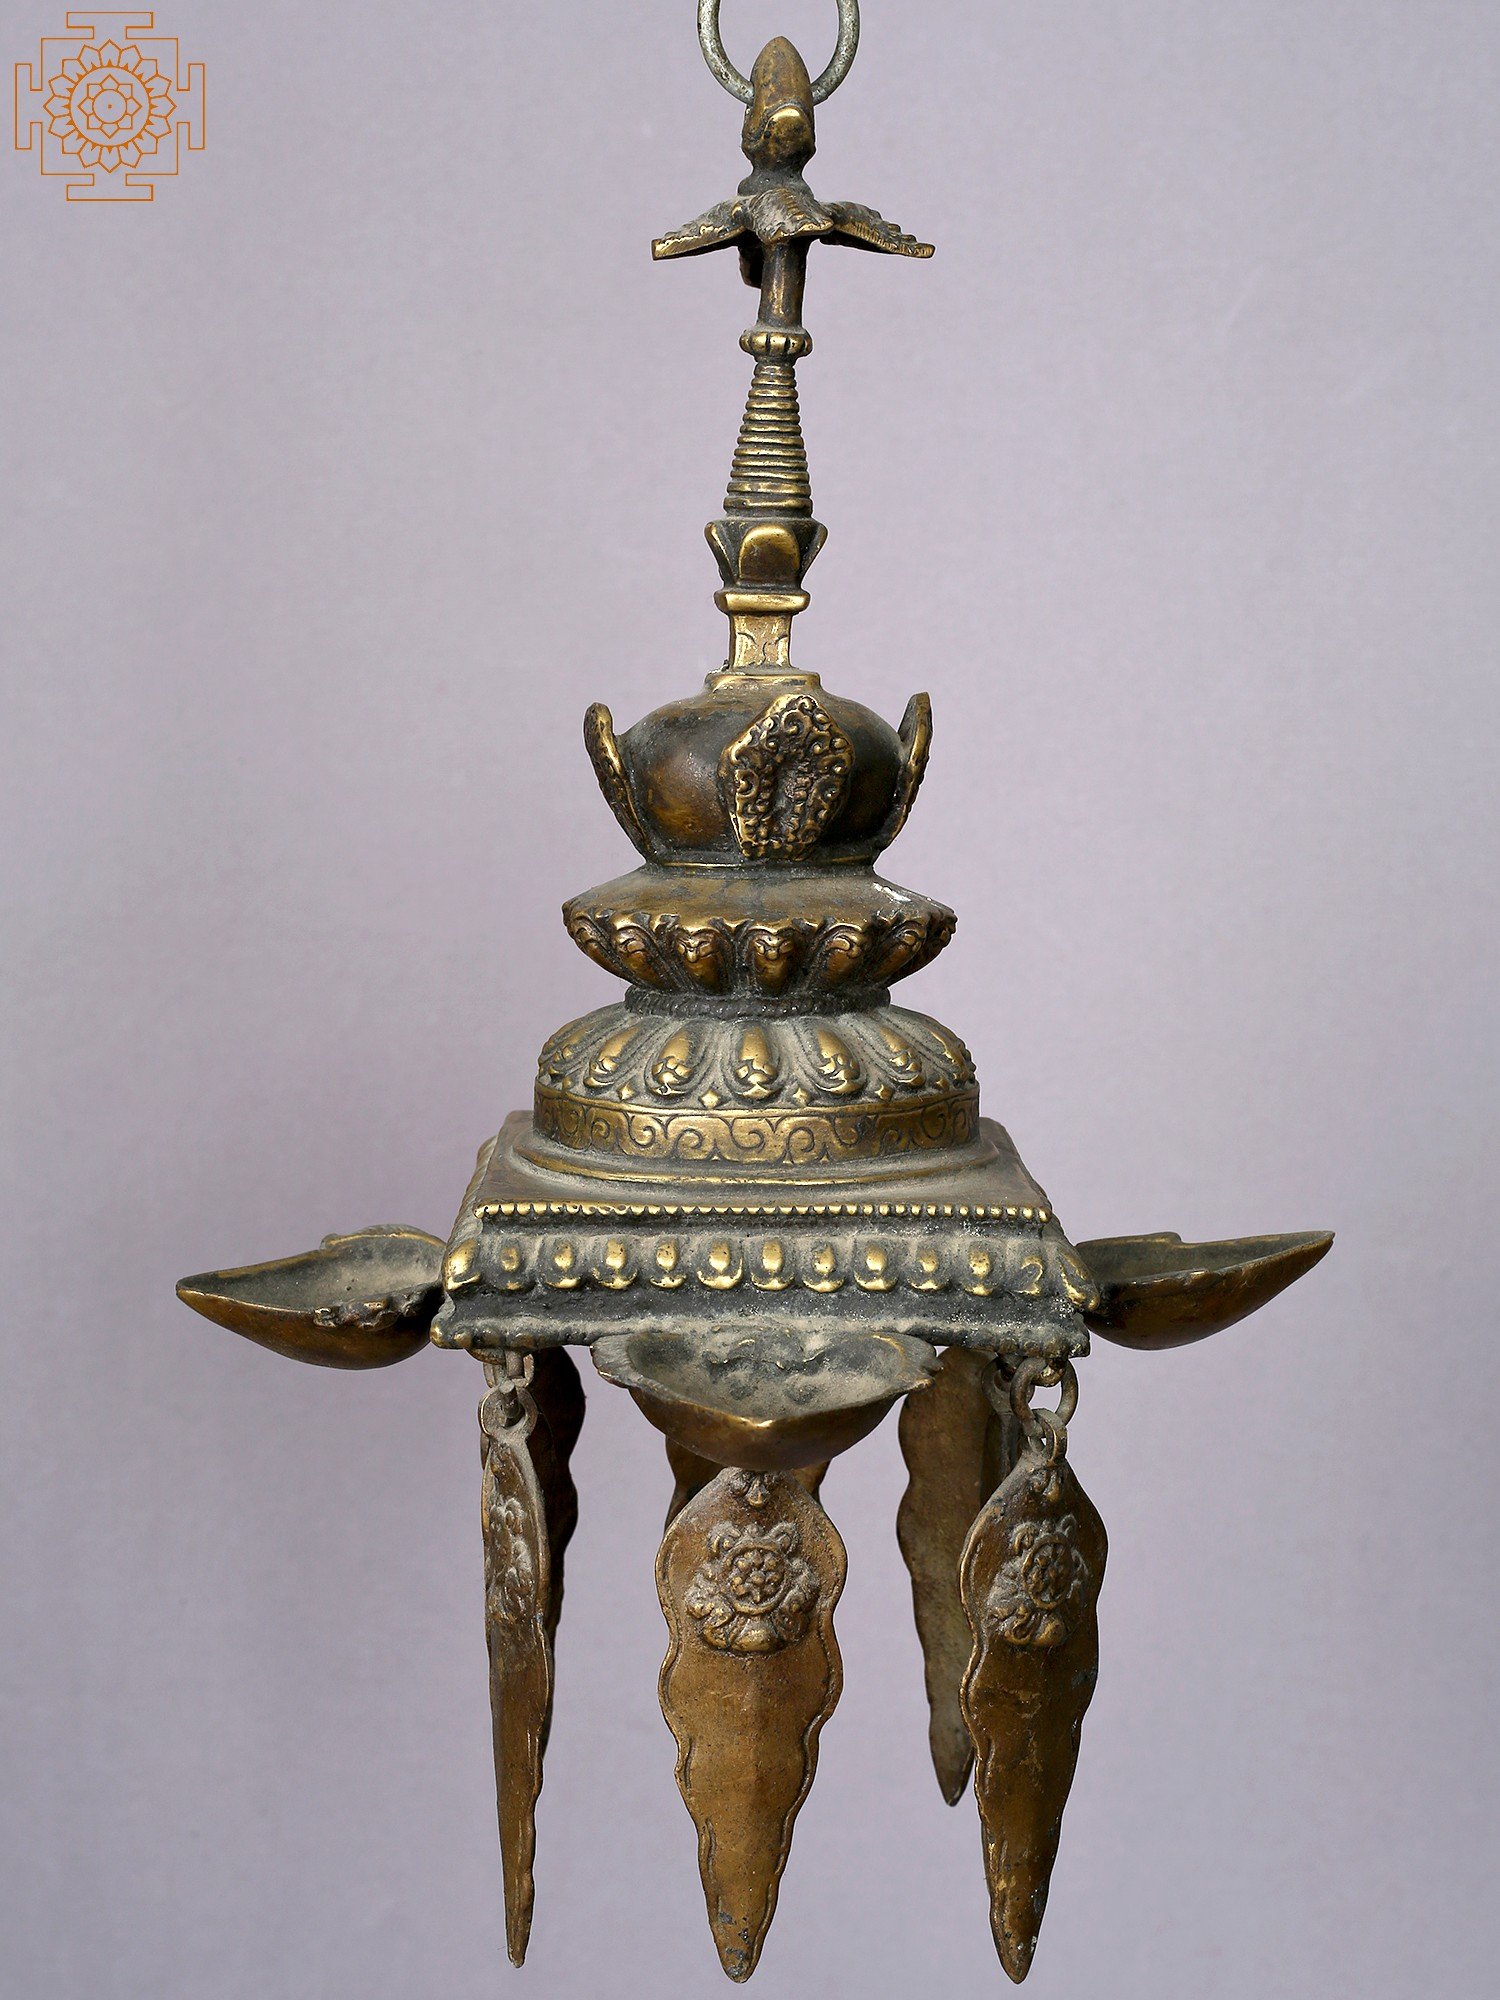 Small Indian Ceremonial Brass Oil Lamp (Trade)